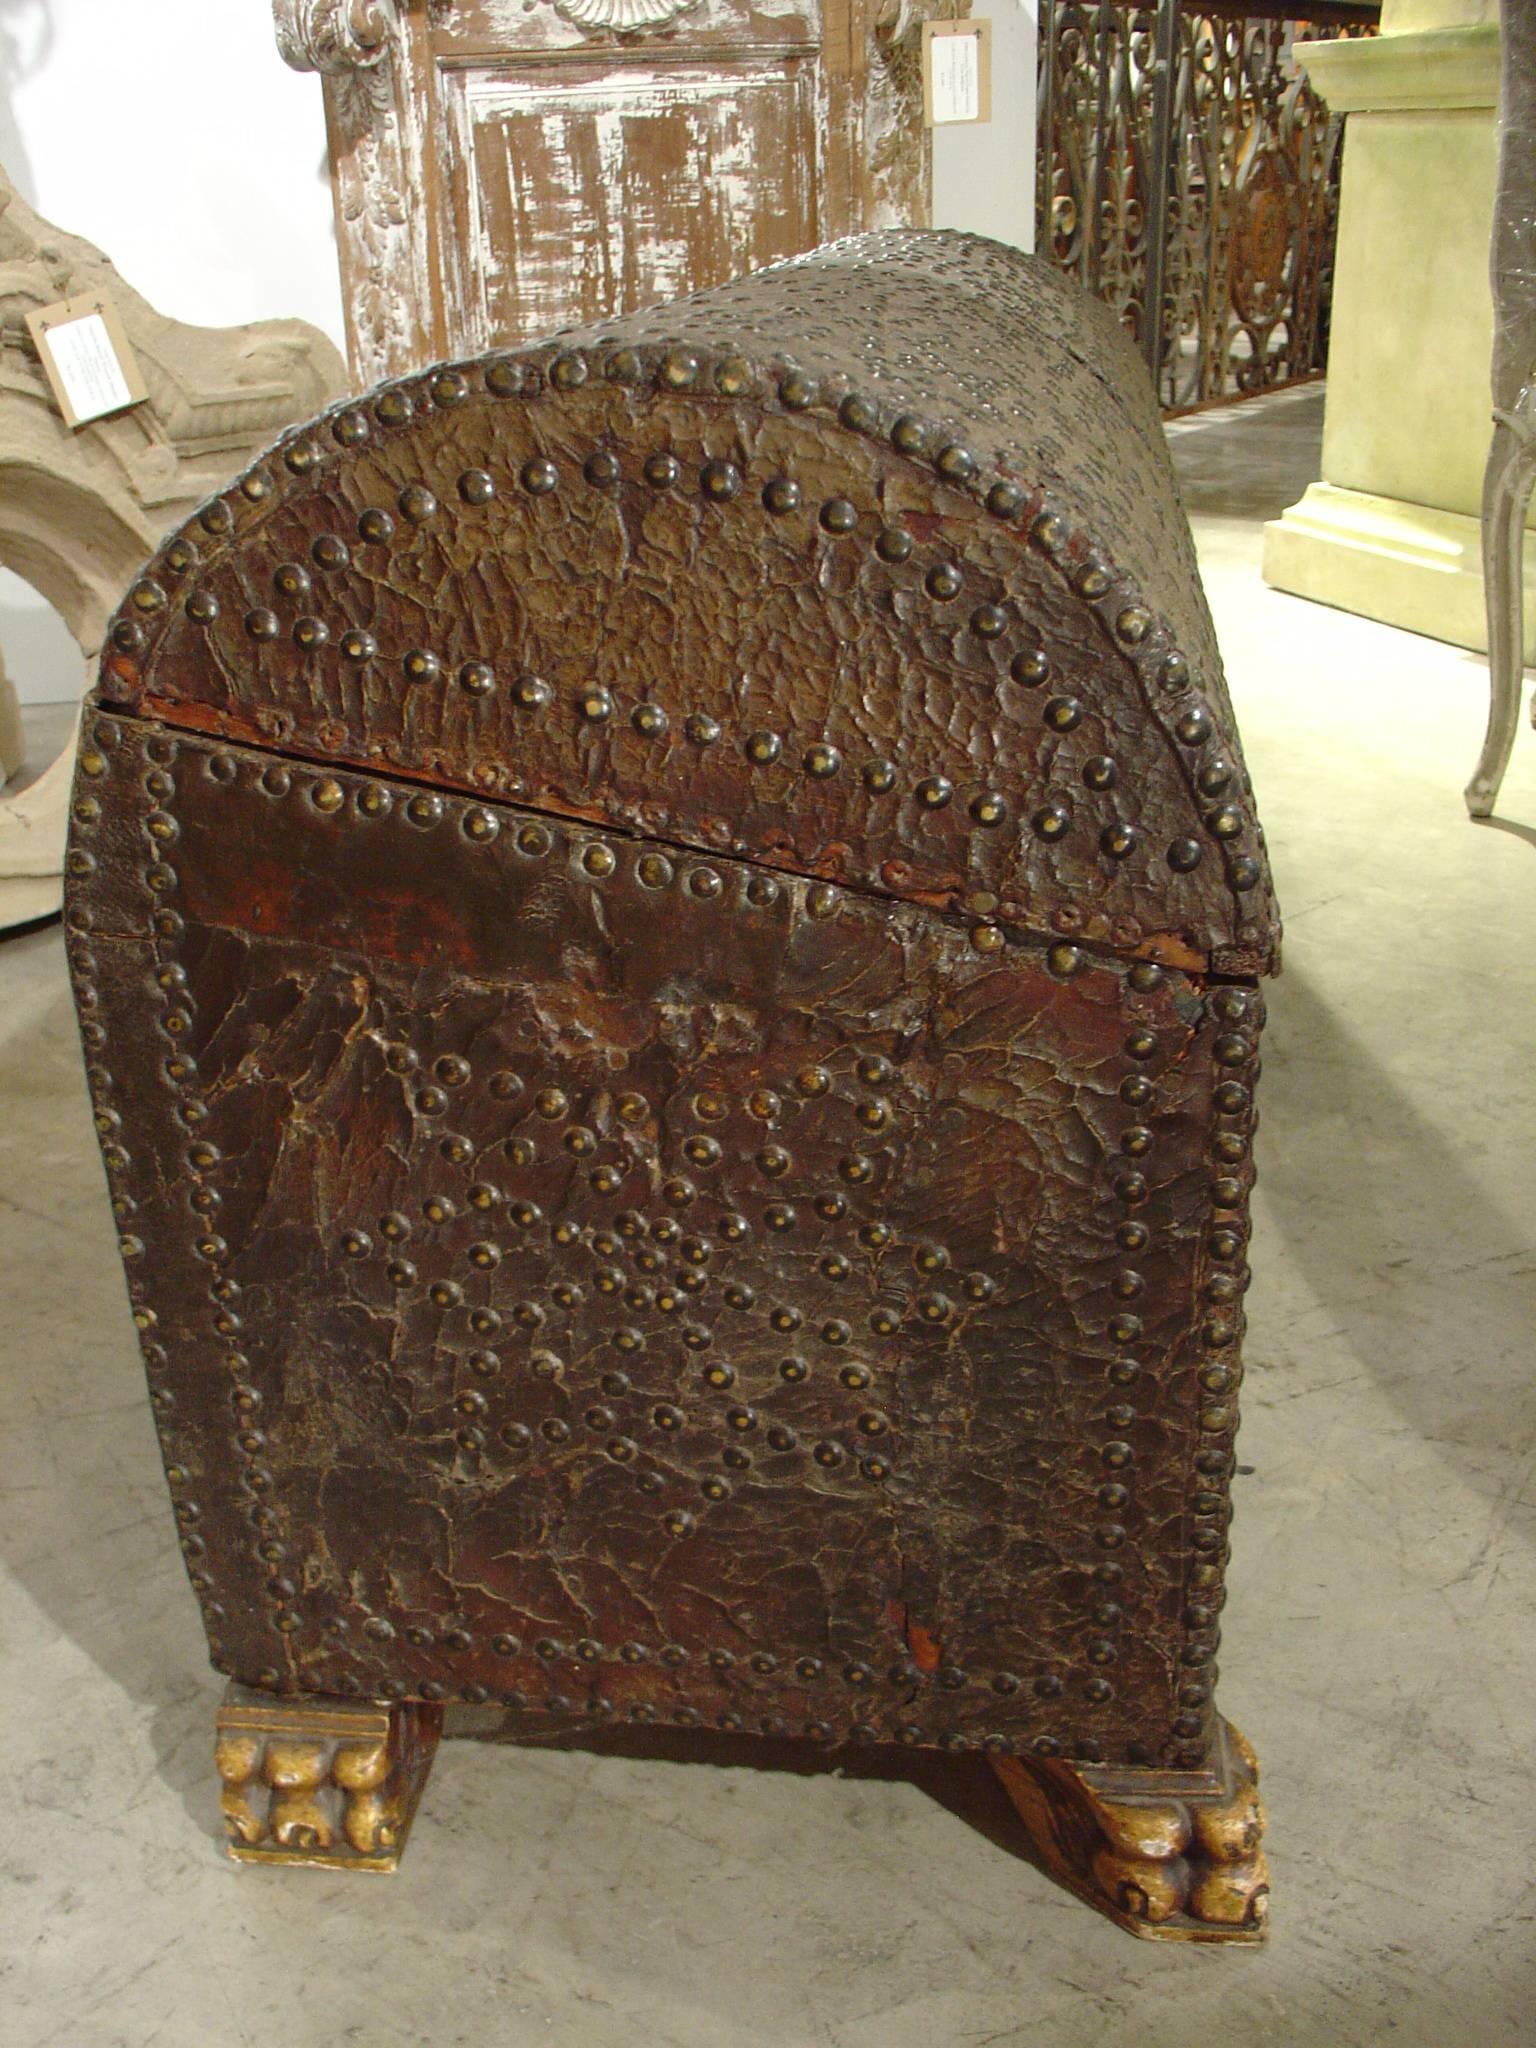 17th Century Rounded Top Leather Trunk from Spain 2